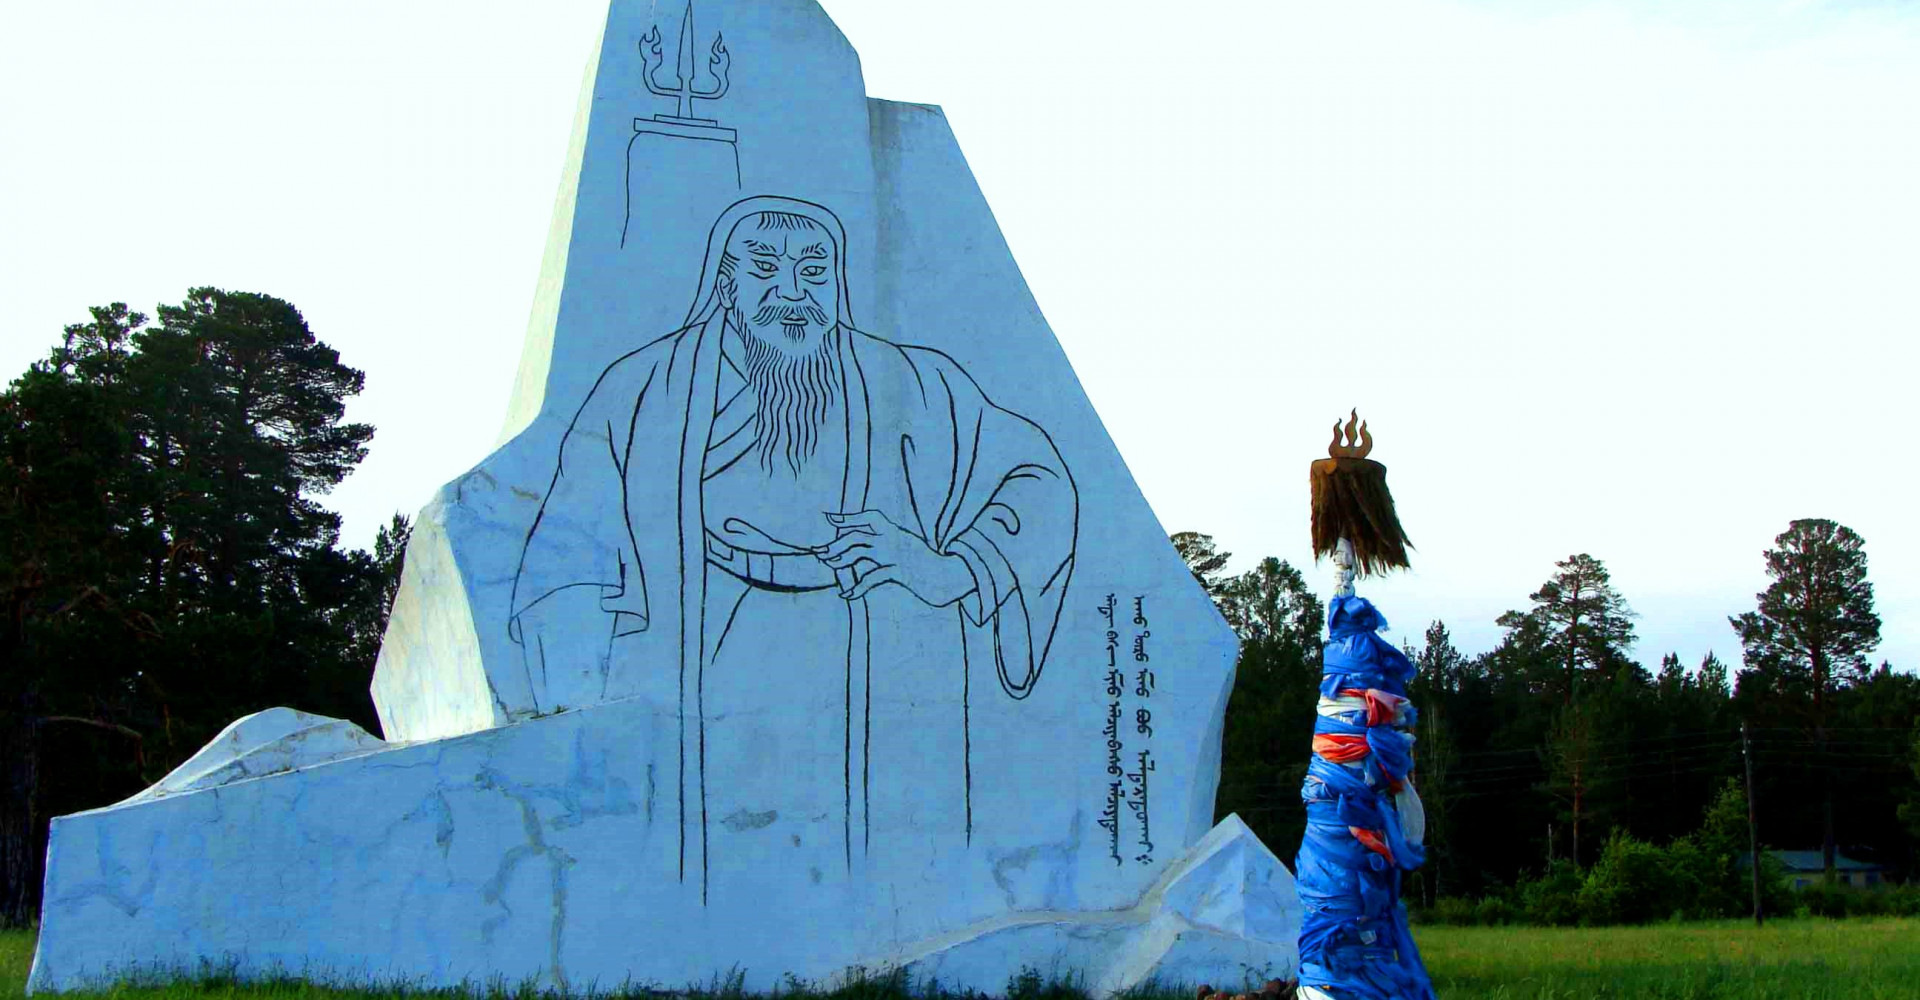 Genghis Khan's birthplace